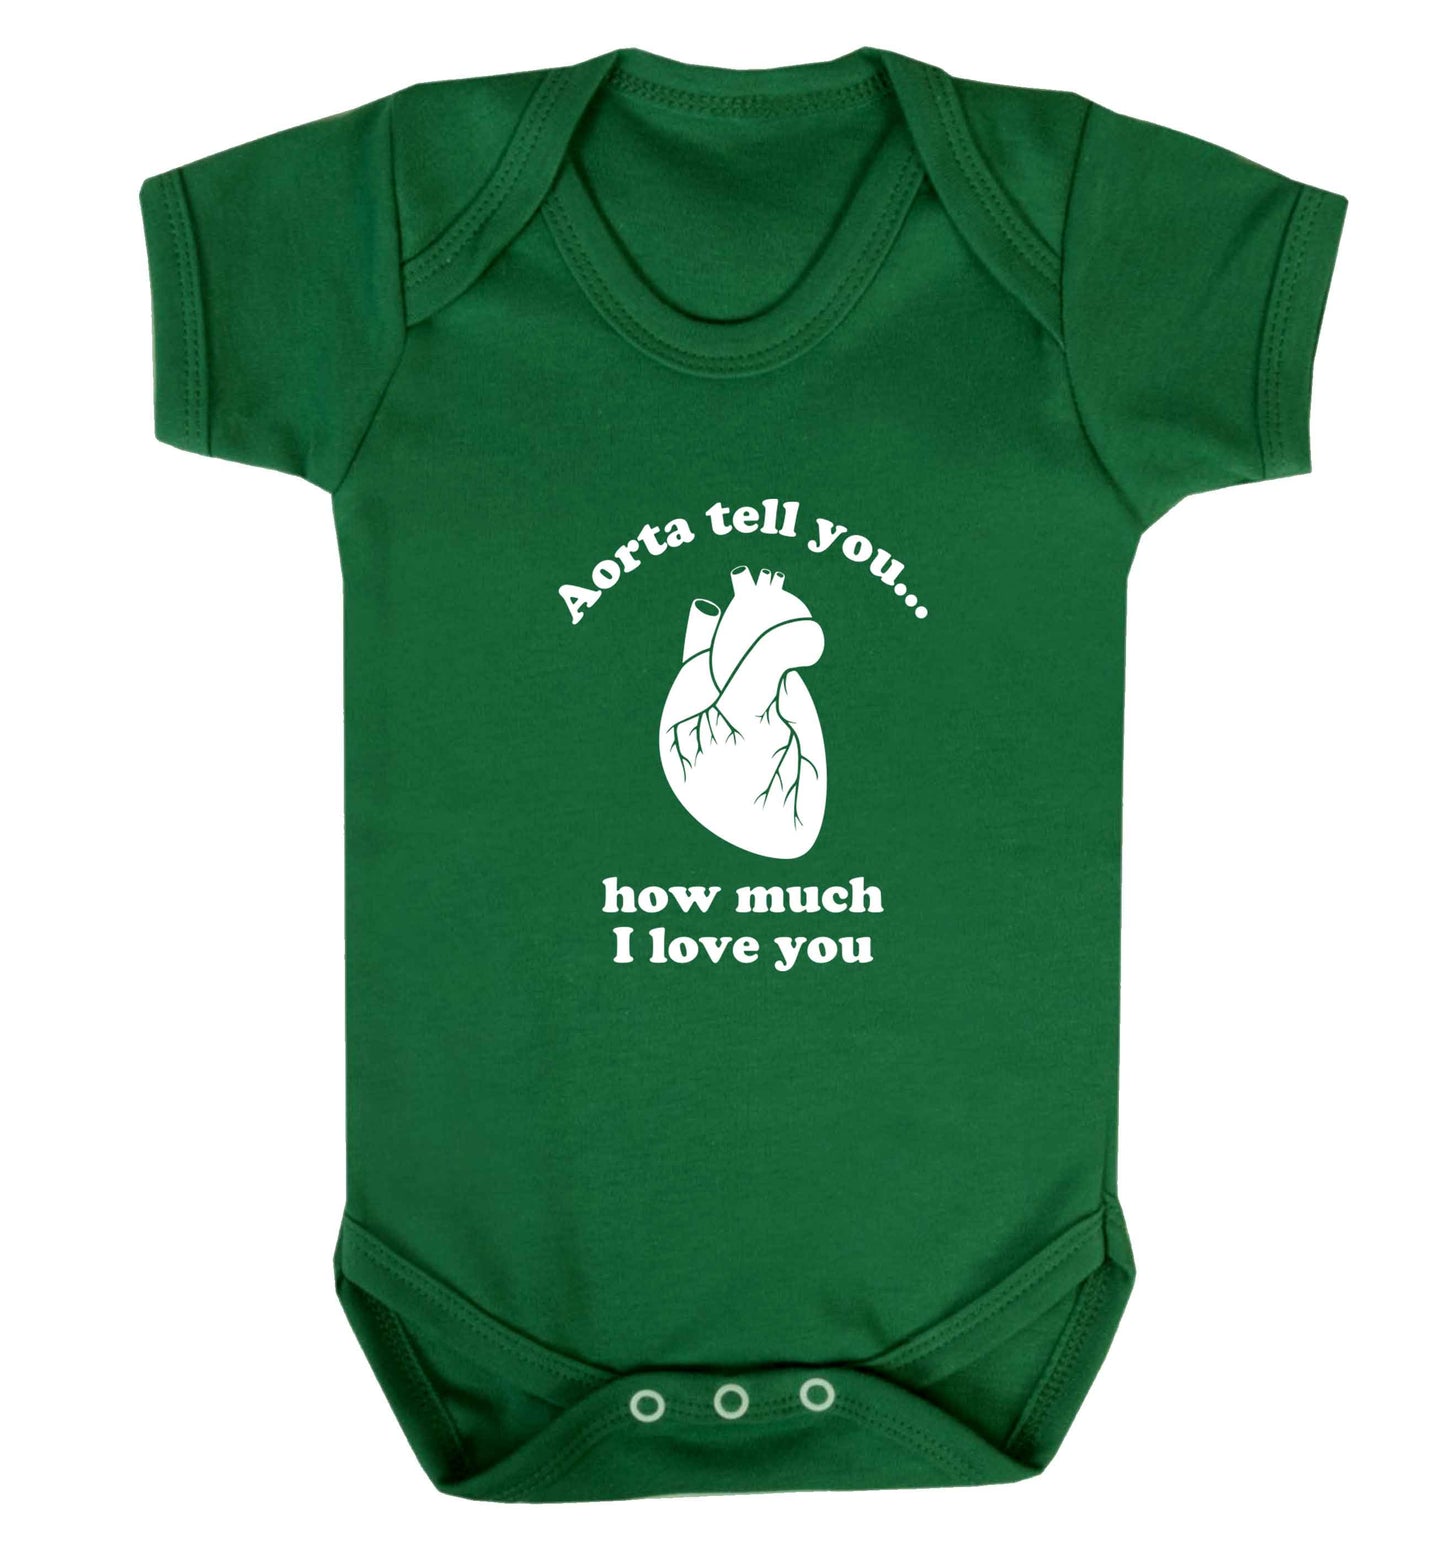 Aorta tell you how much I love you baby vest green 18-24 months